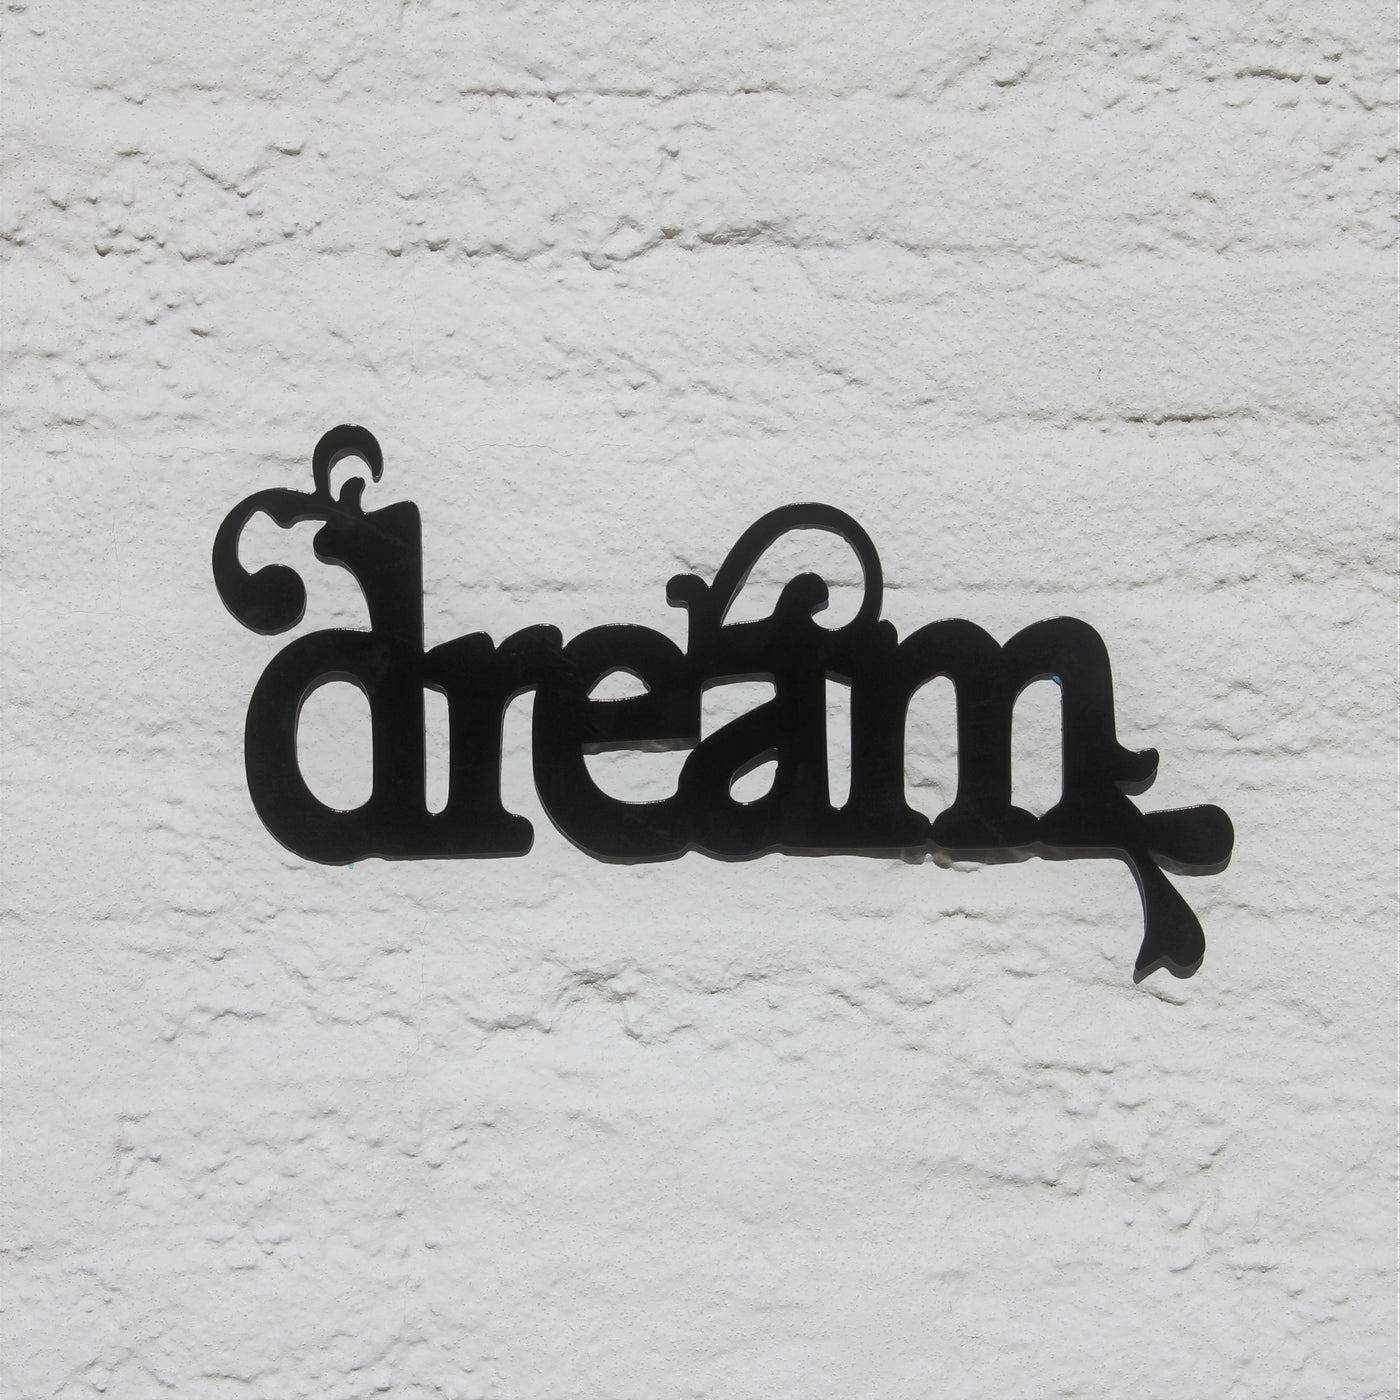 Dream Metal Word Sign - Madison Iron and Wood - Wall Art - metal outdoor decor - Steel deocrations - american made products - veteran owned business products - fencing decorations - fencing supplies - custom wall decorations - personalized wall signs - steel - decorative post caps - steel post caps - metal post caps - brackets - structural brackets - home improvement - easter - easter decorations - easter gift - easter yard decor